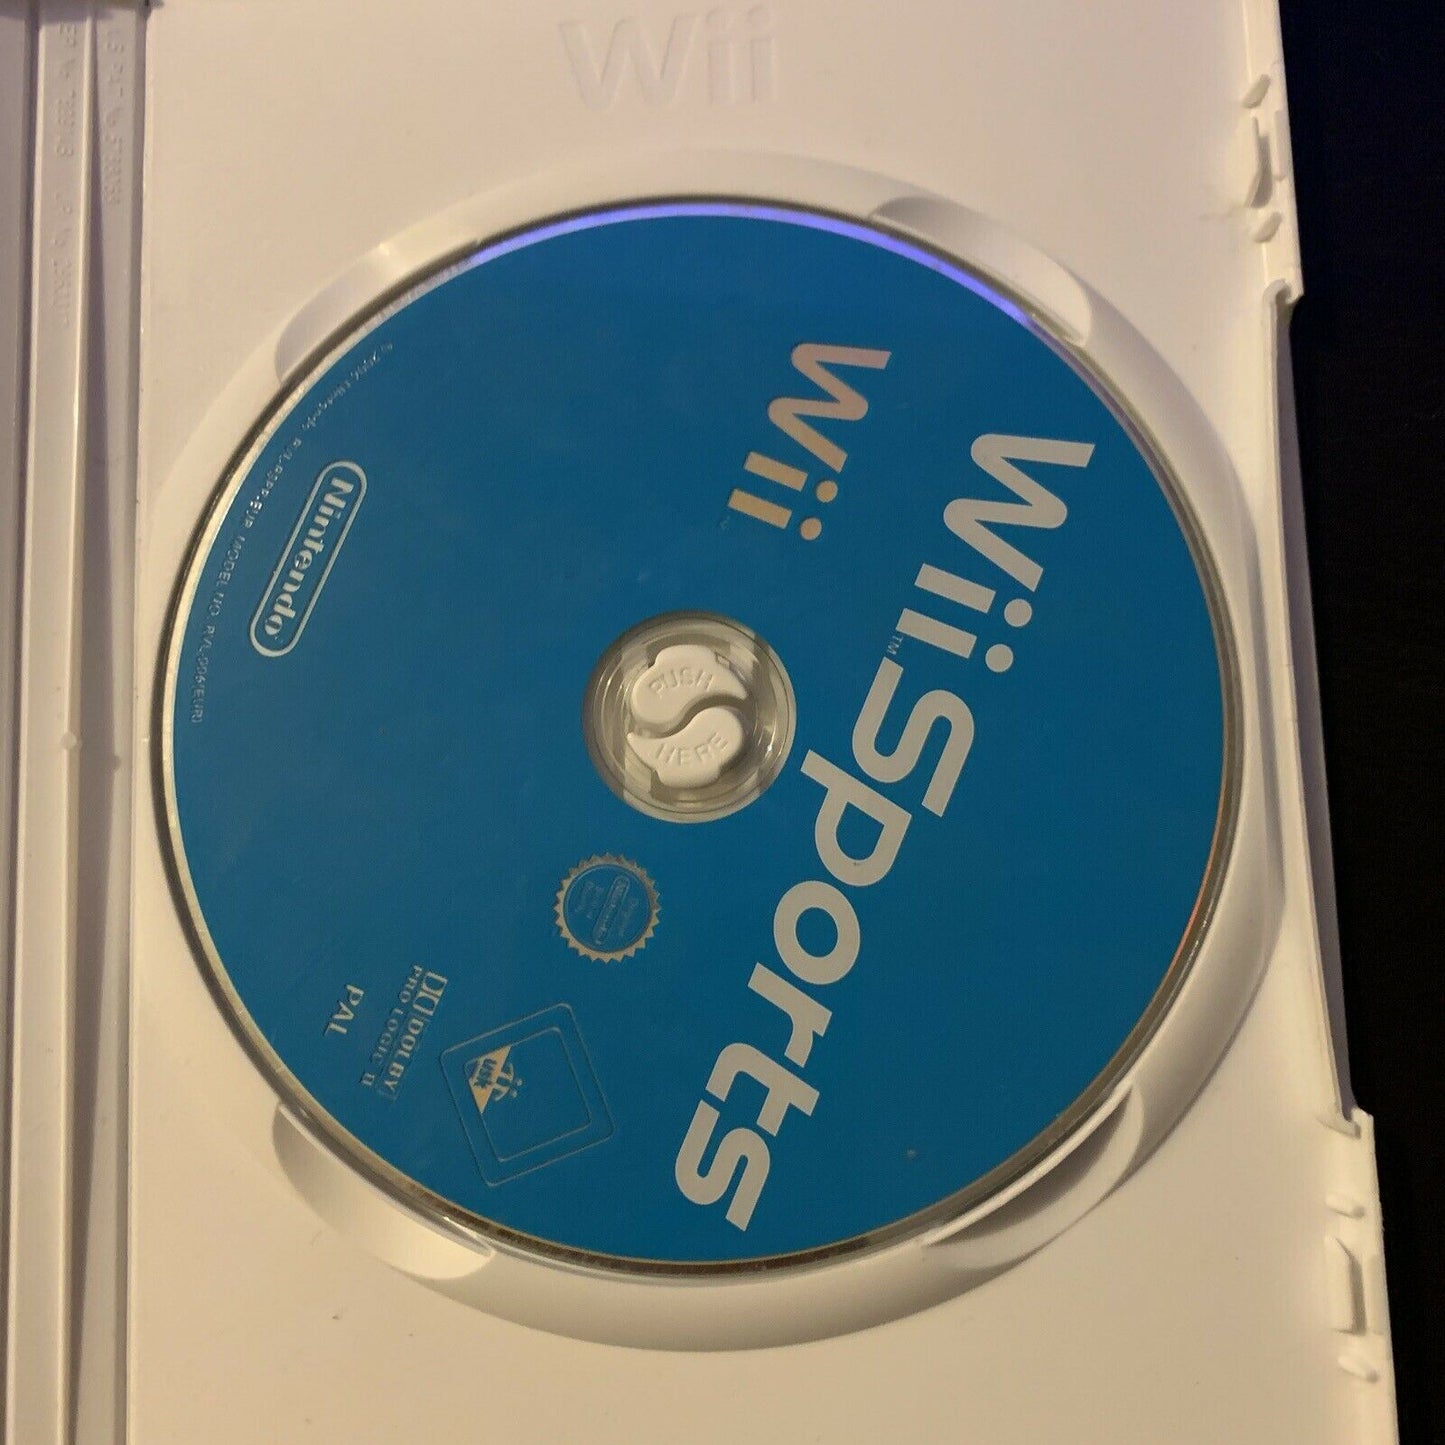 Wii Sports - Nintendo Wii PAL Game